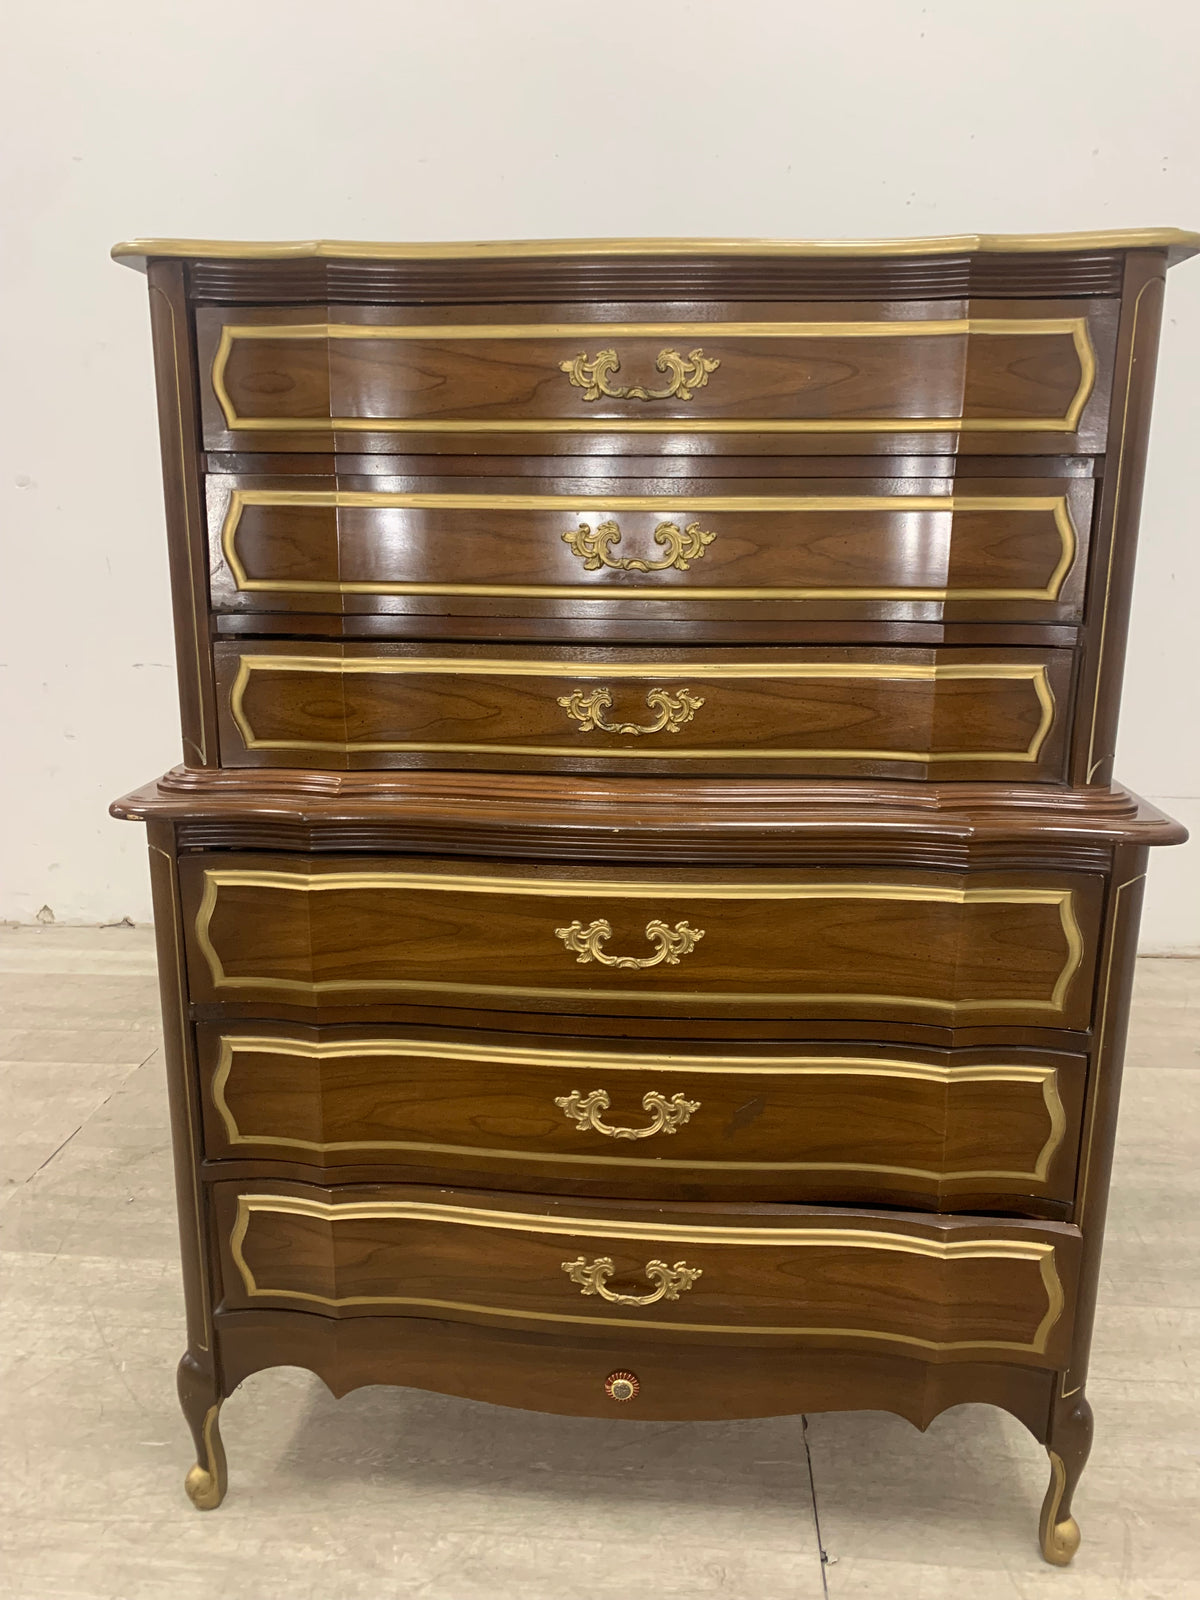 Wood 6 Drawer Dresser With Gold Accents